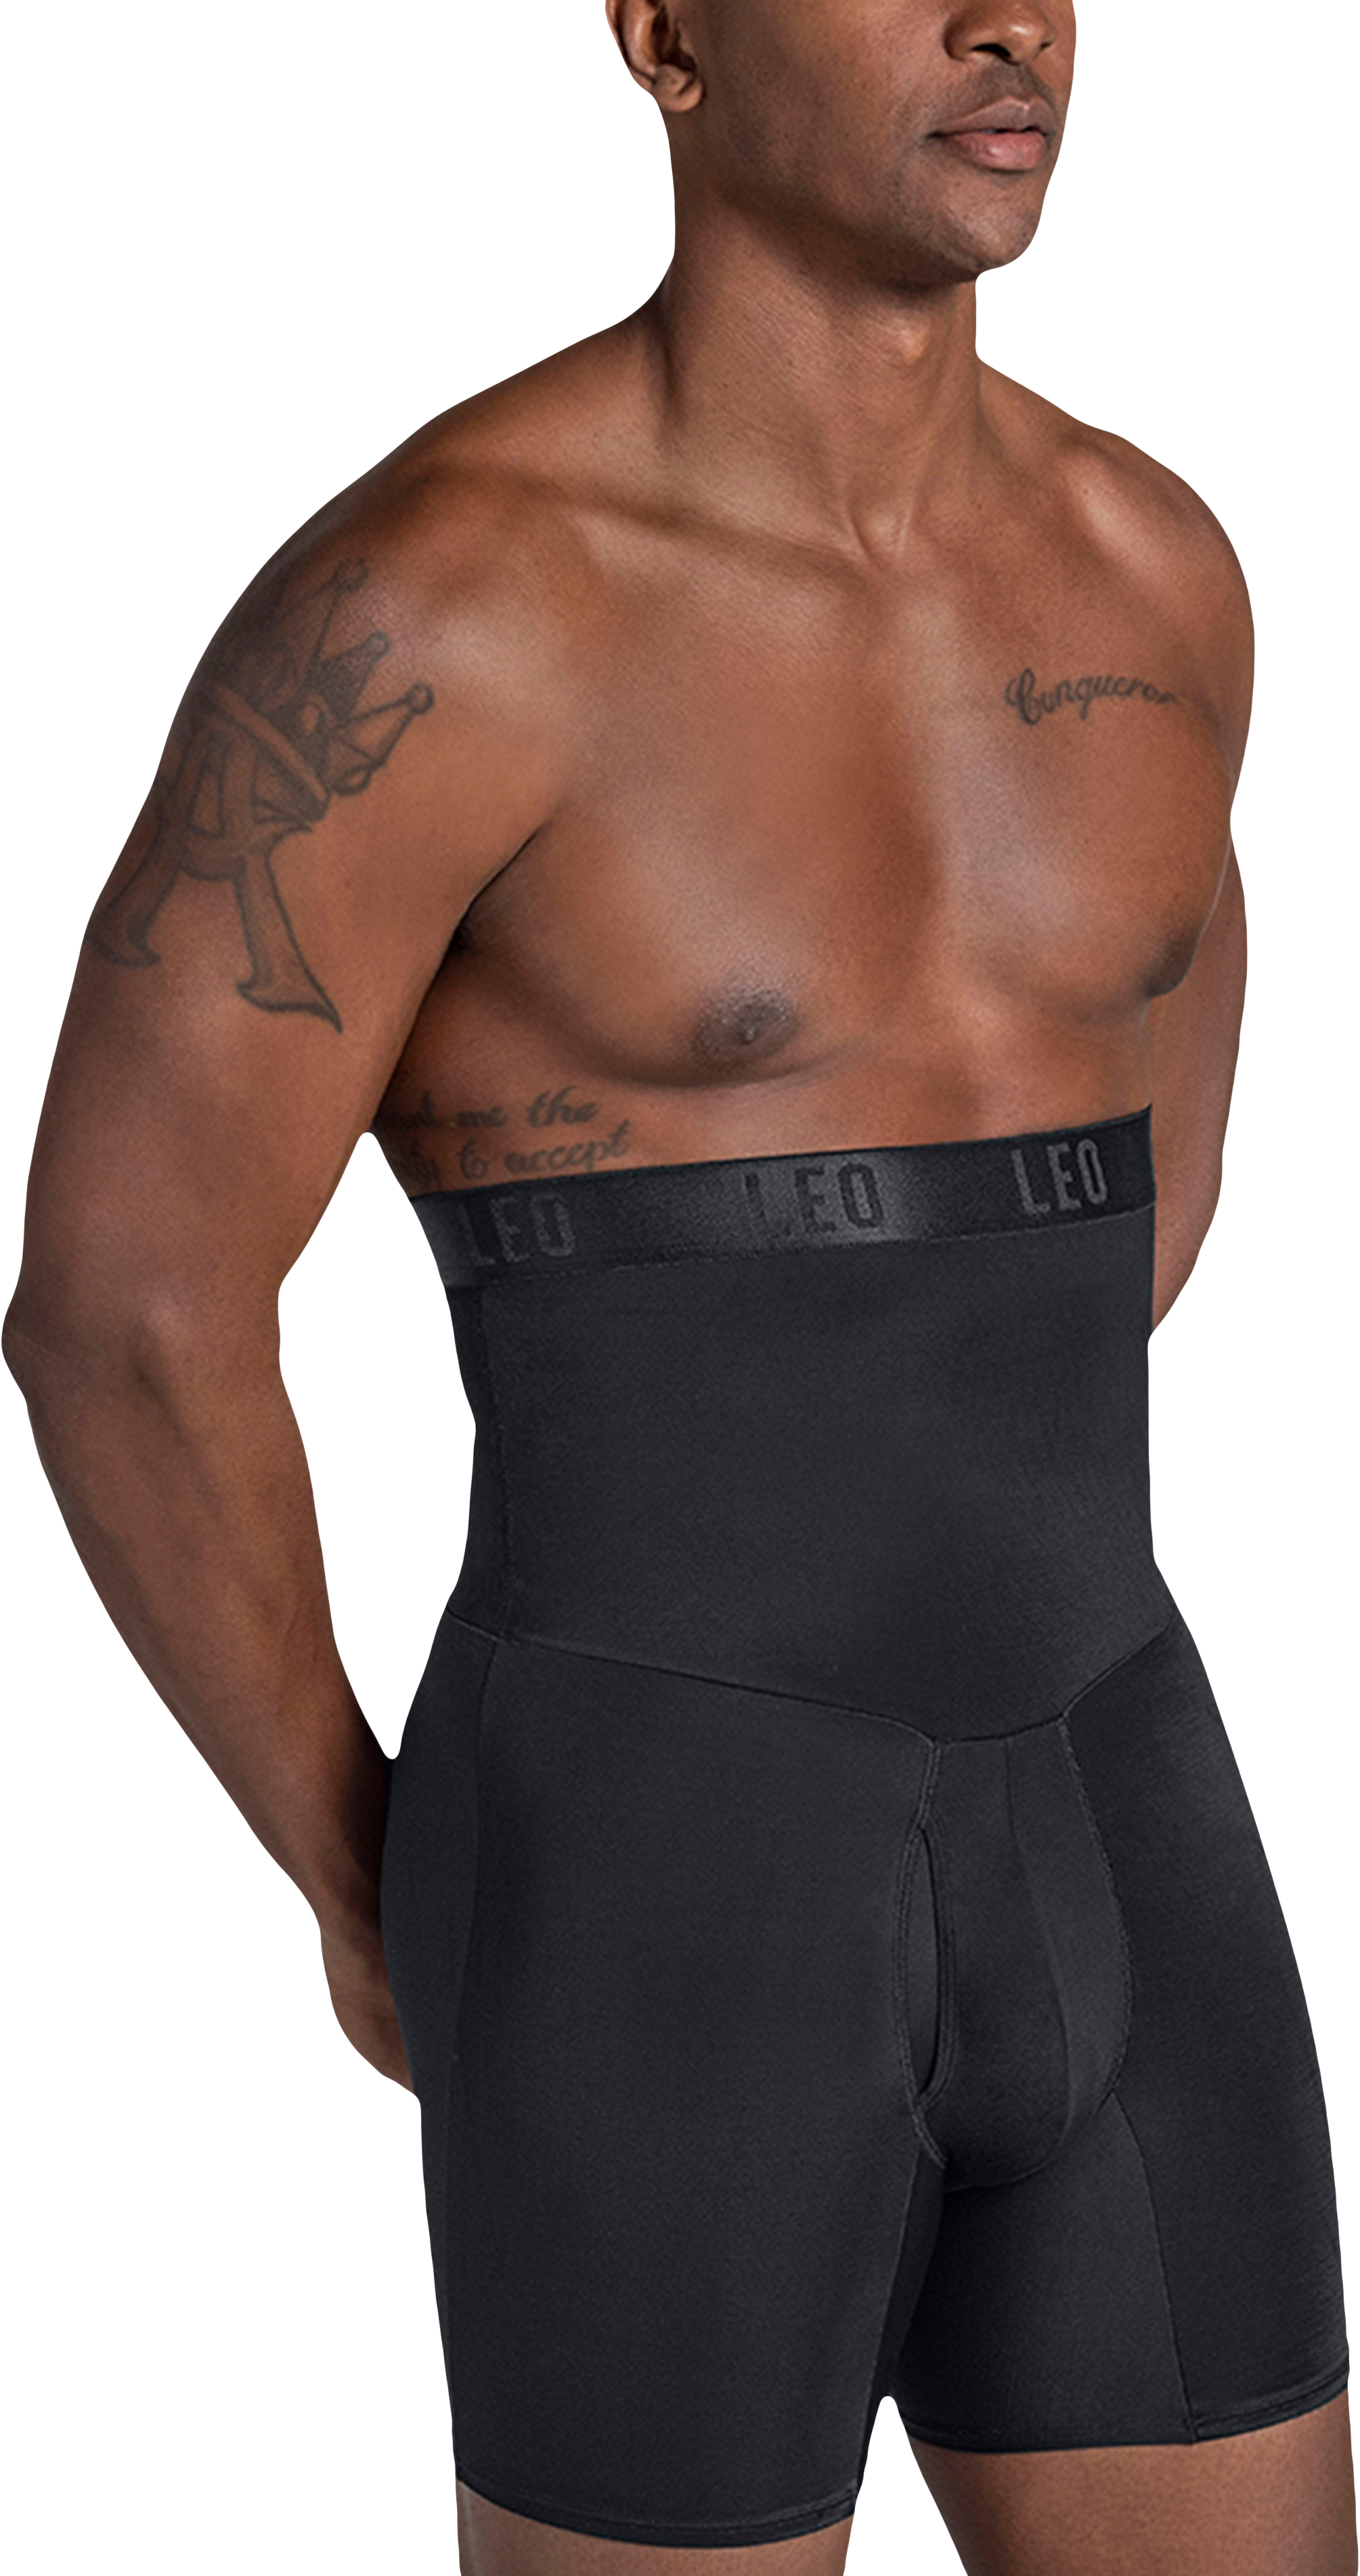 Leonisa Firm Control Adjustable Compression Belly Shaper 012400 - Macy's